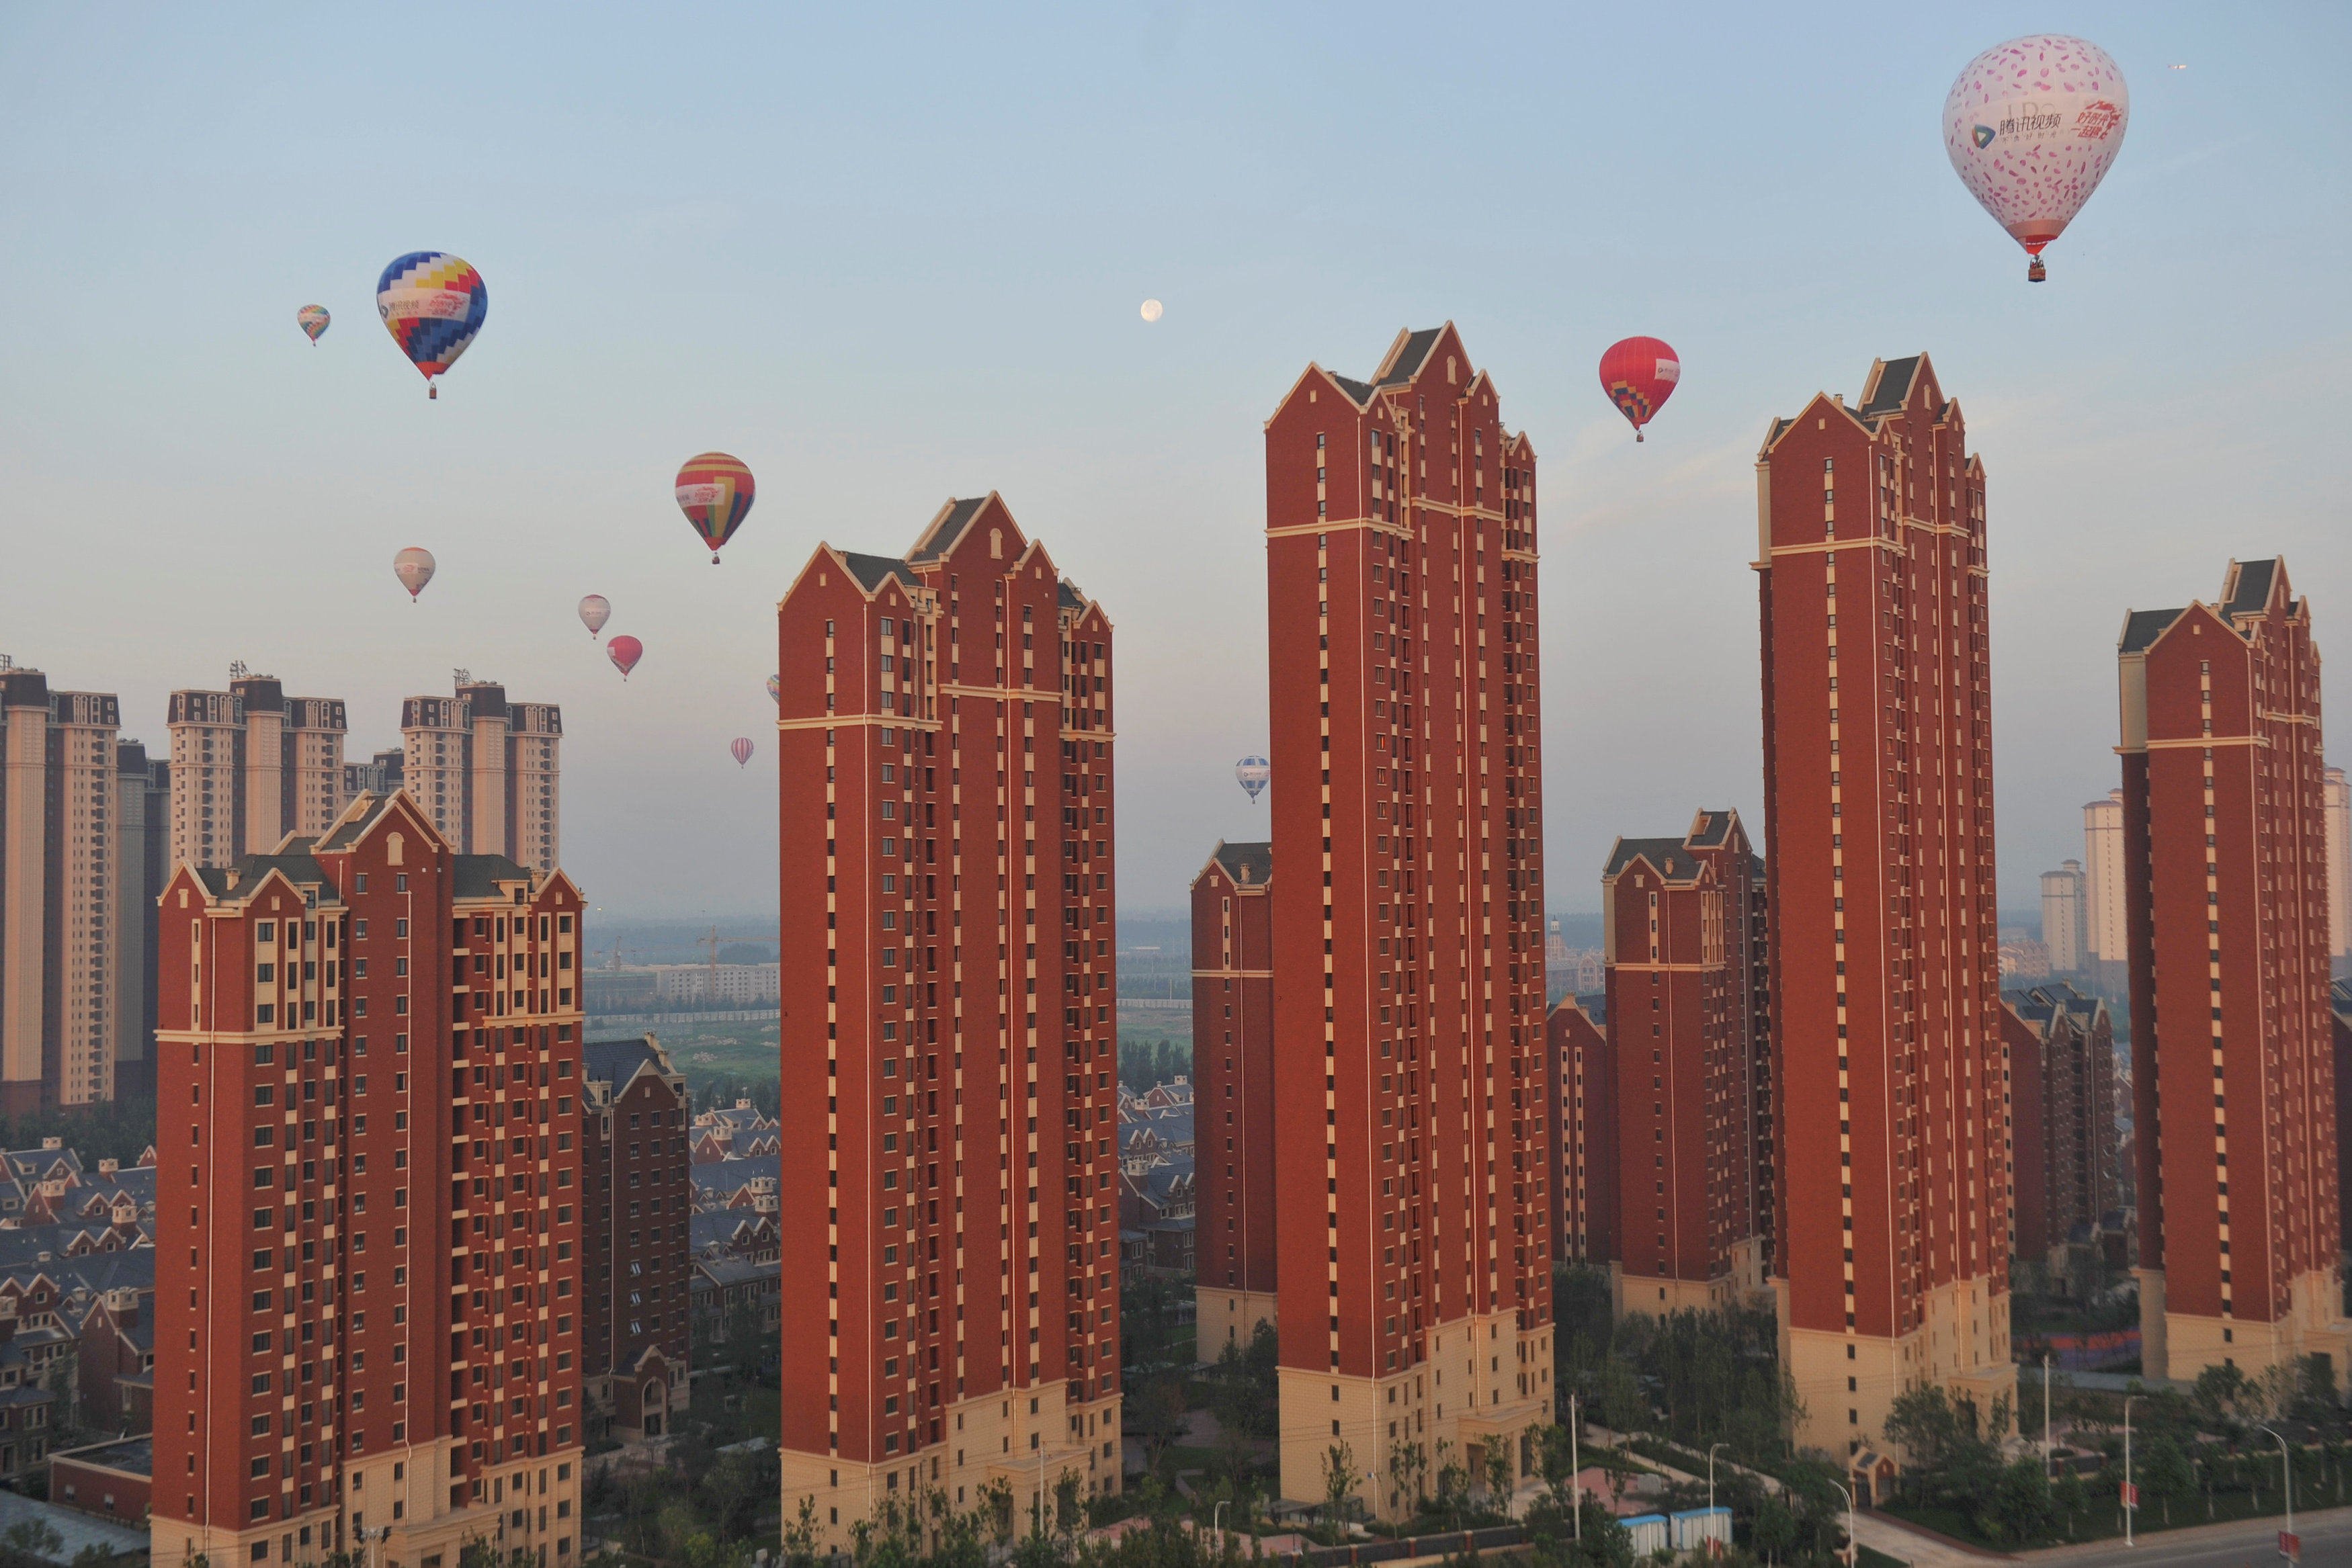 Hot air balloons fly over residential buildings in Wuqing district of Tianjin, China on July 11, 2017. The biggest headwind for domestic demand is the deflation of the property bubble. Photo: Reuters